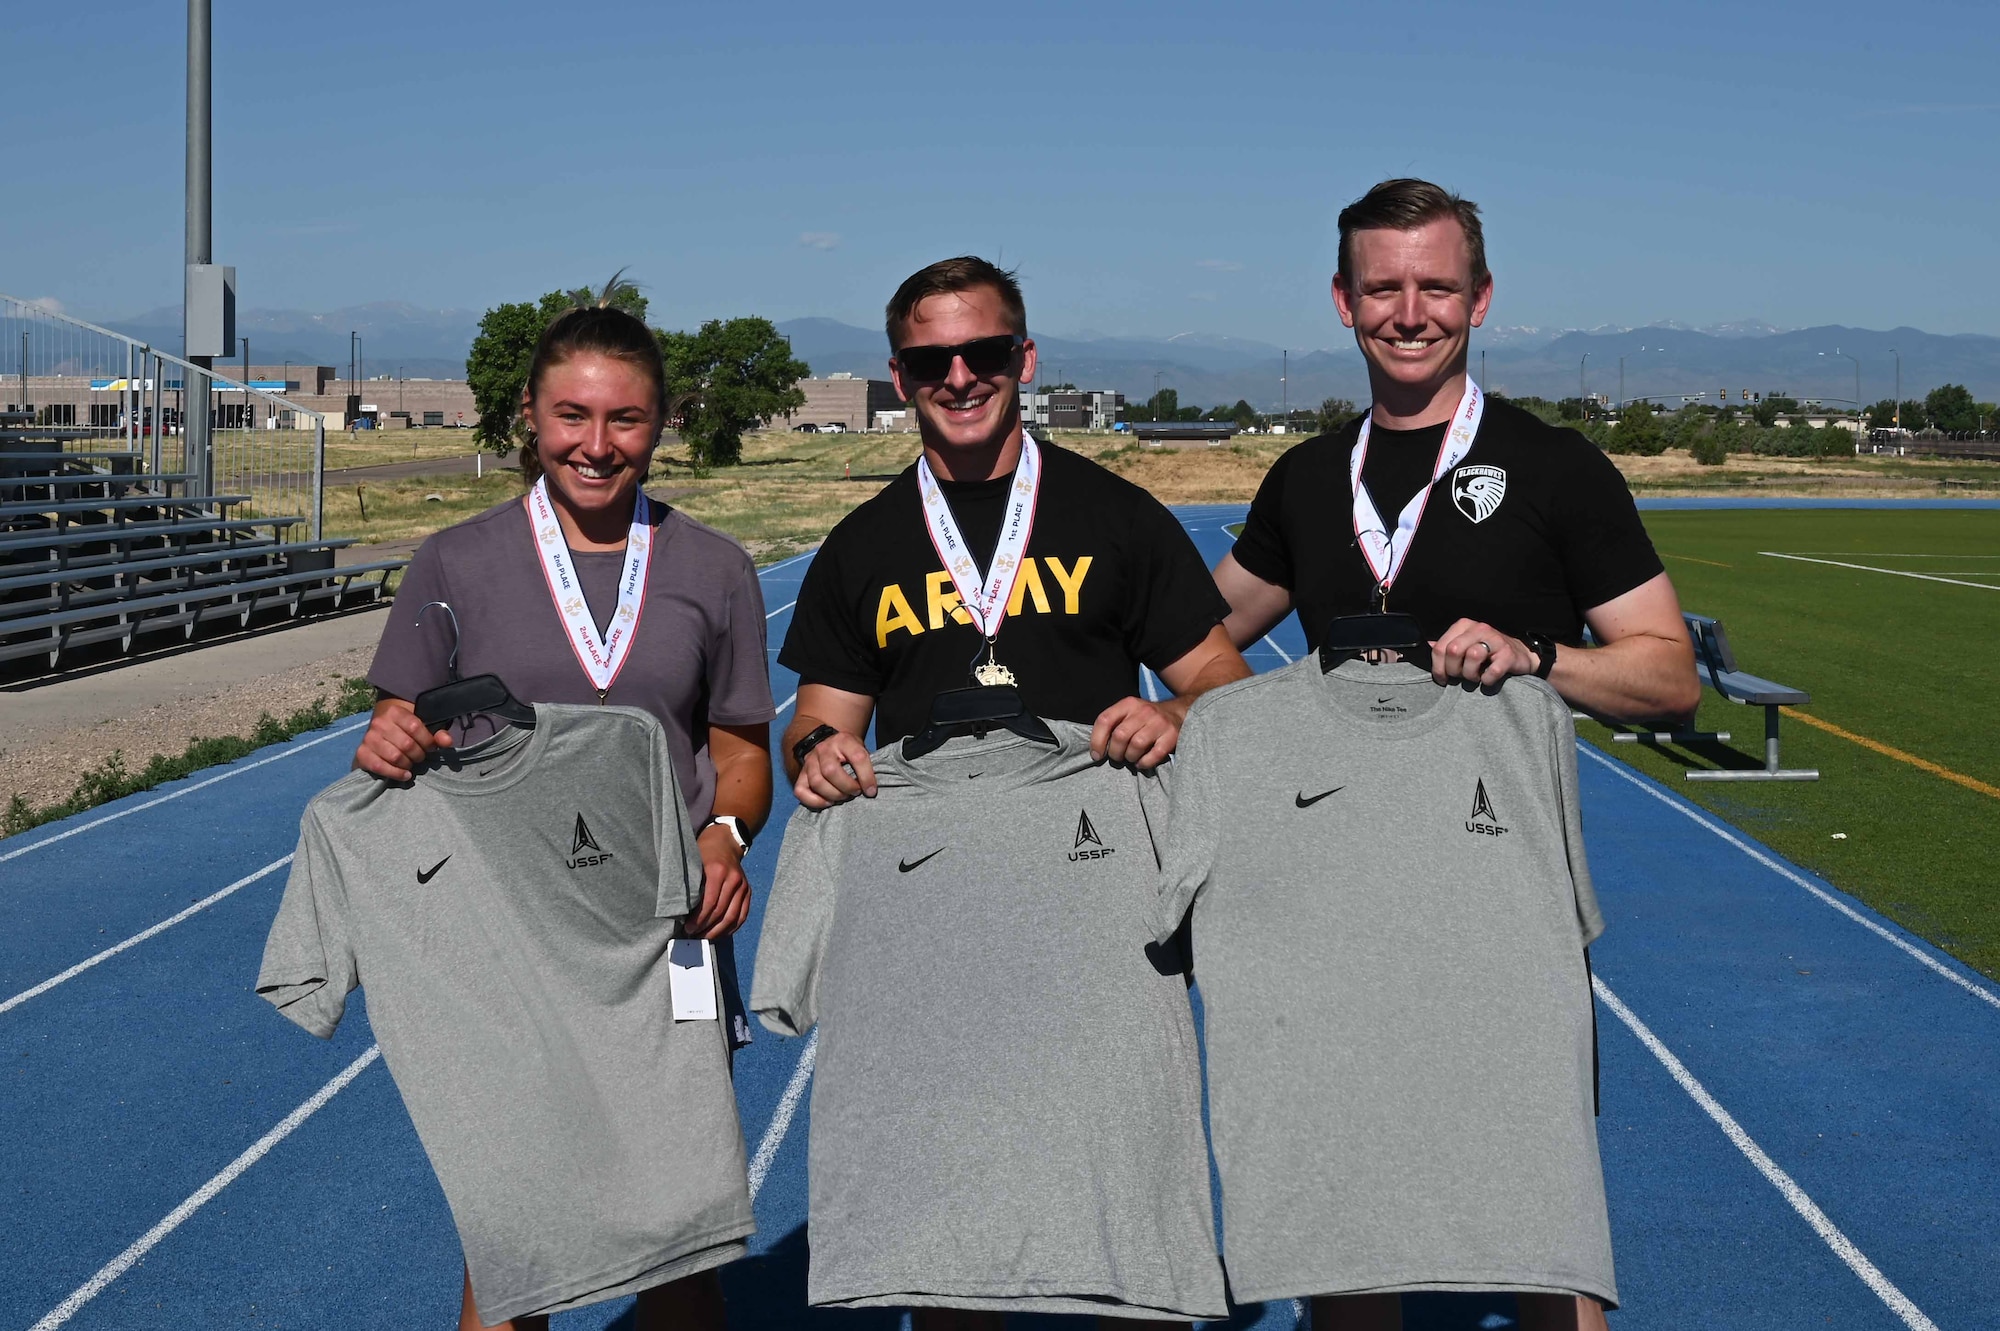 Three winners of a race pose on a track with their medals and Space Force t-shirts